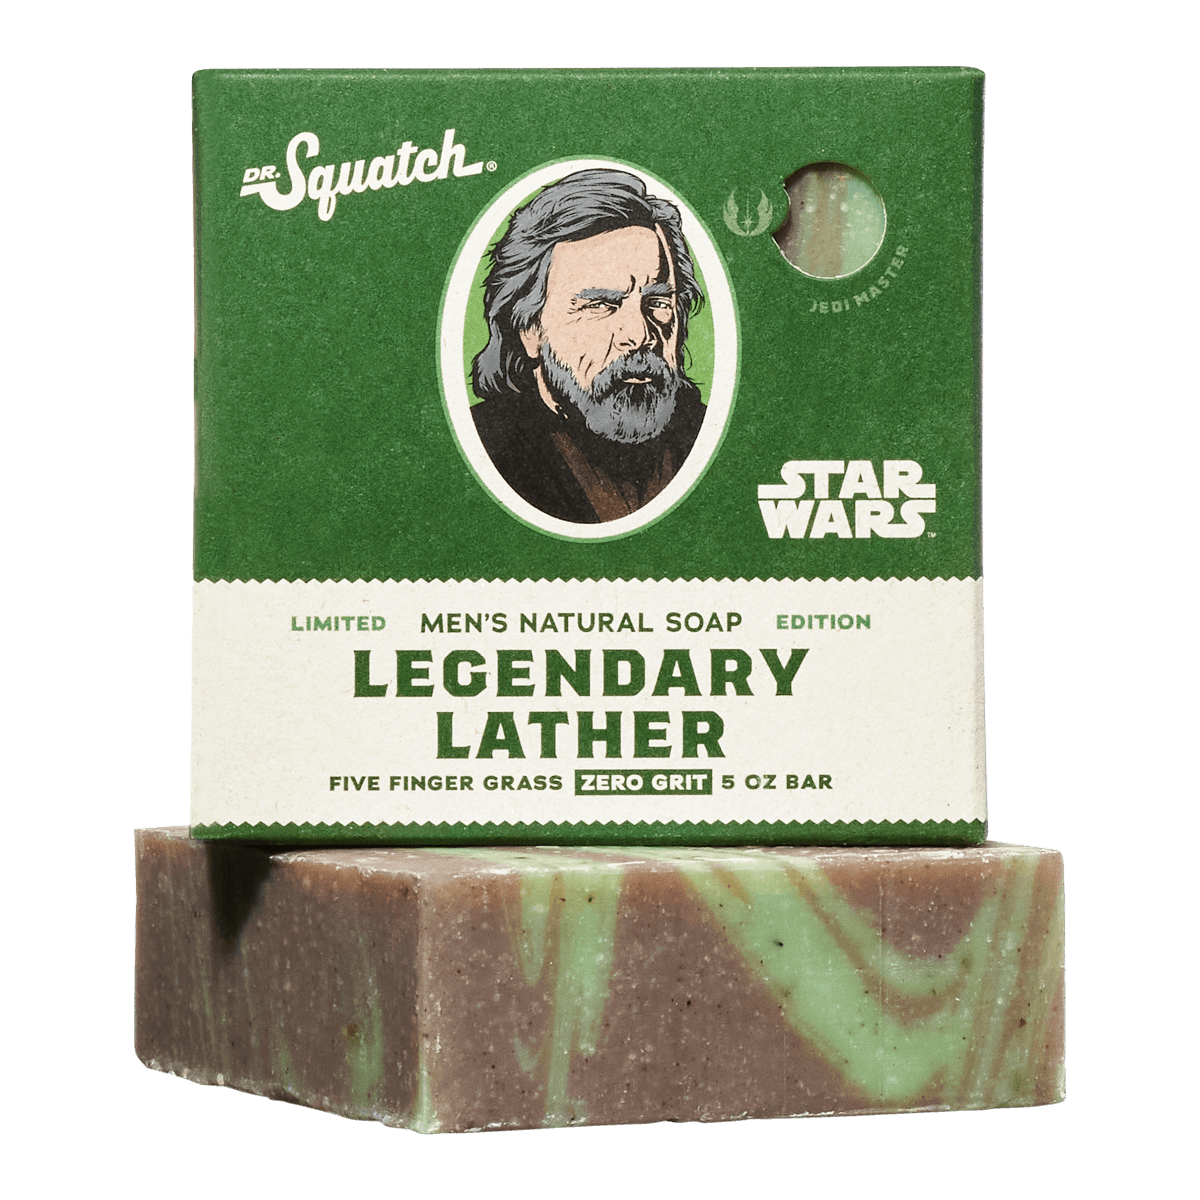  Dr. Squatch All Natural Bar Soap for Men with Light